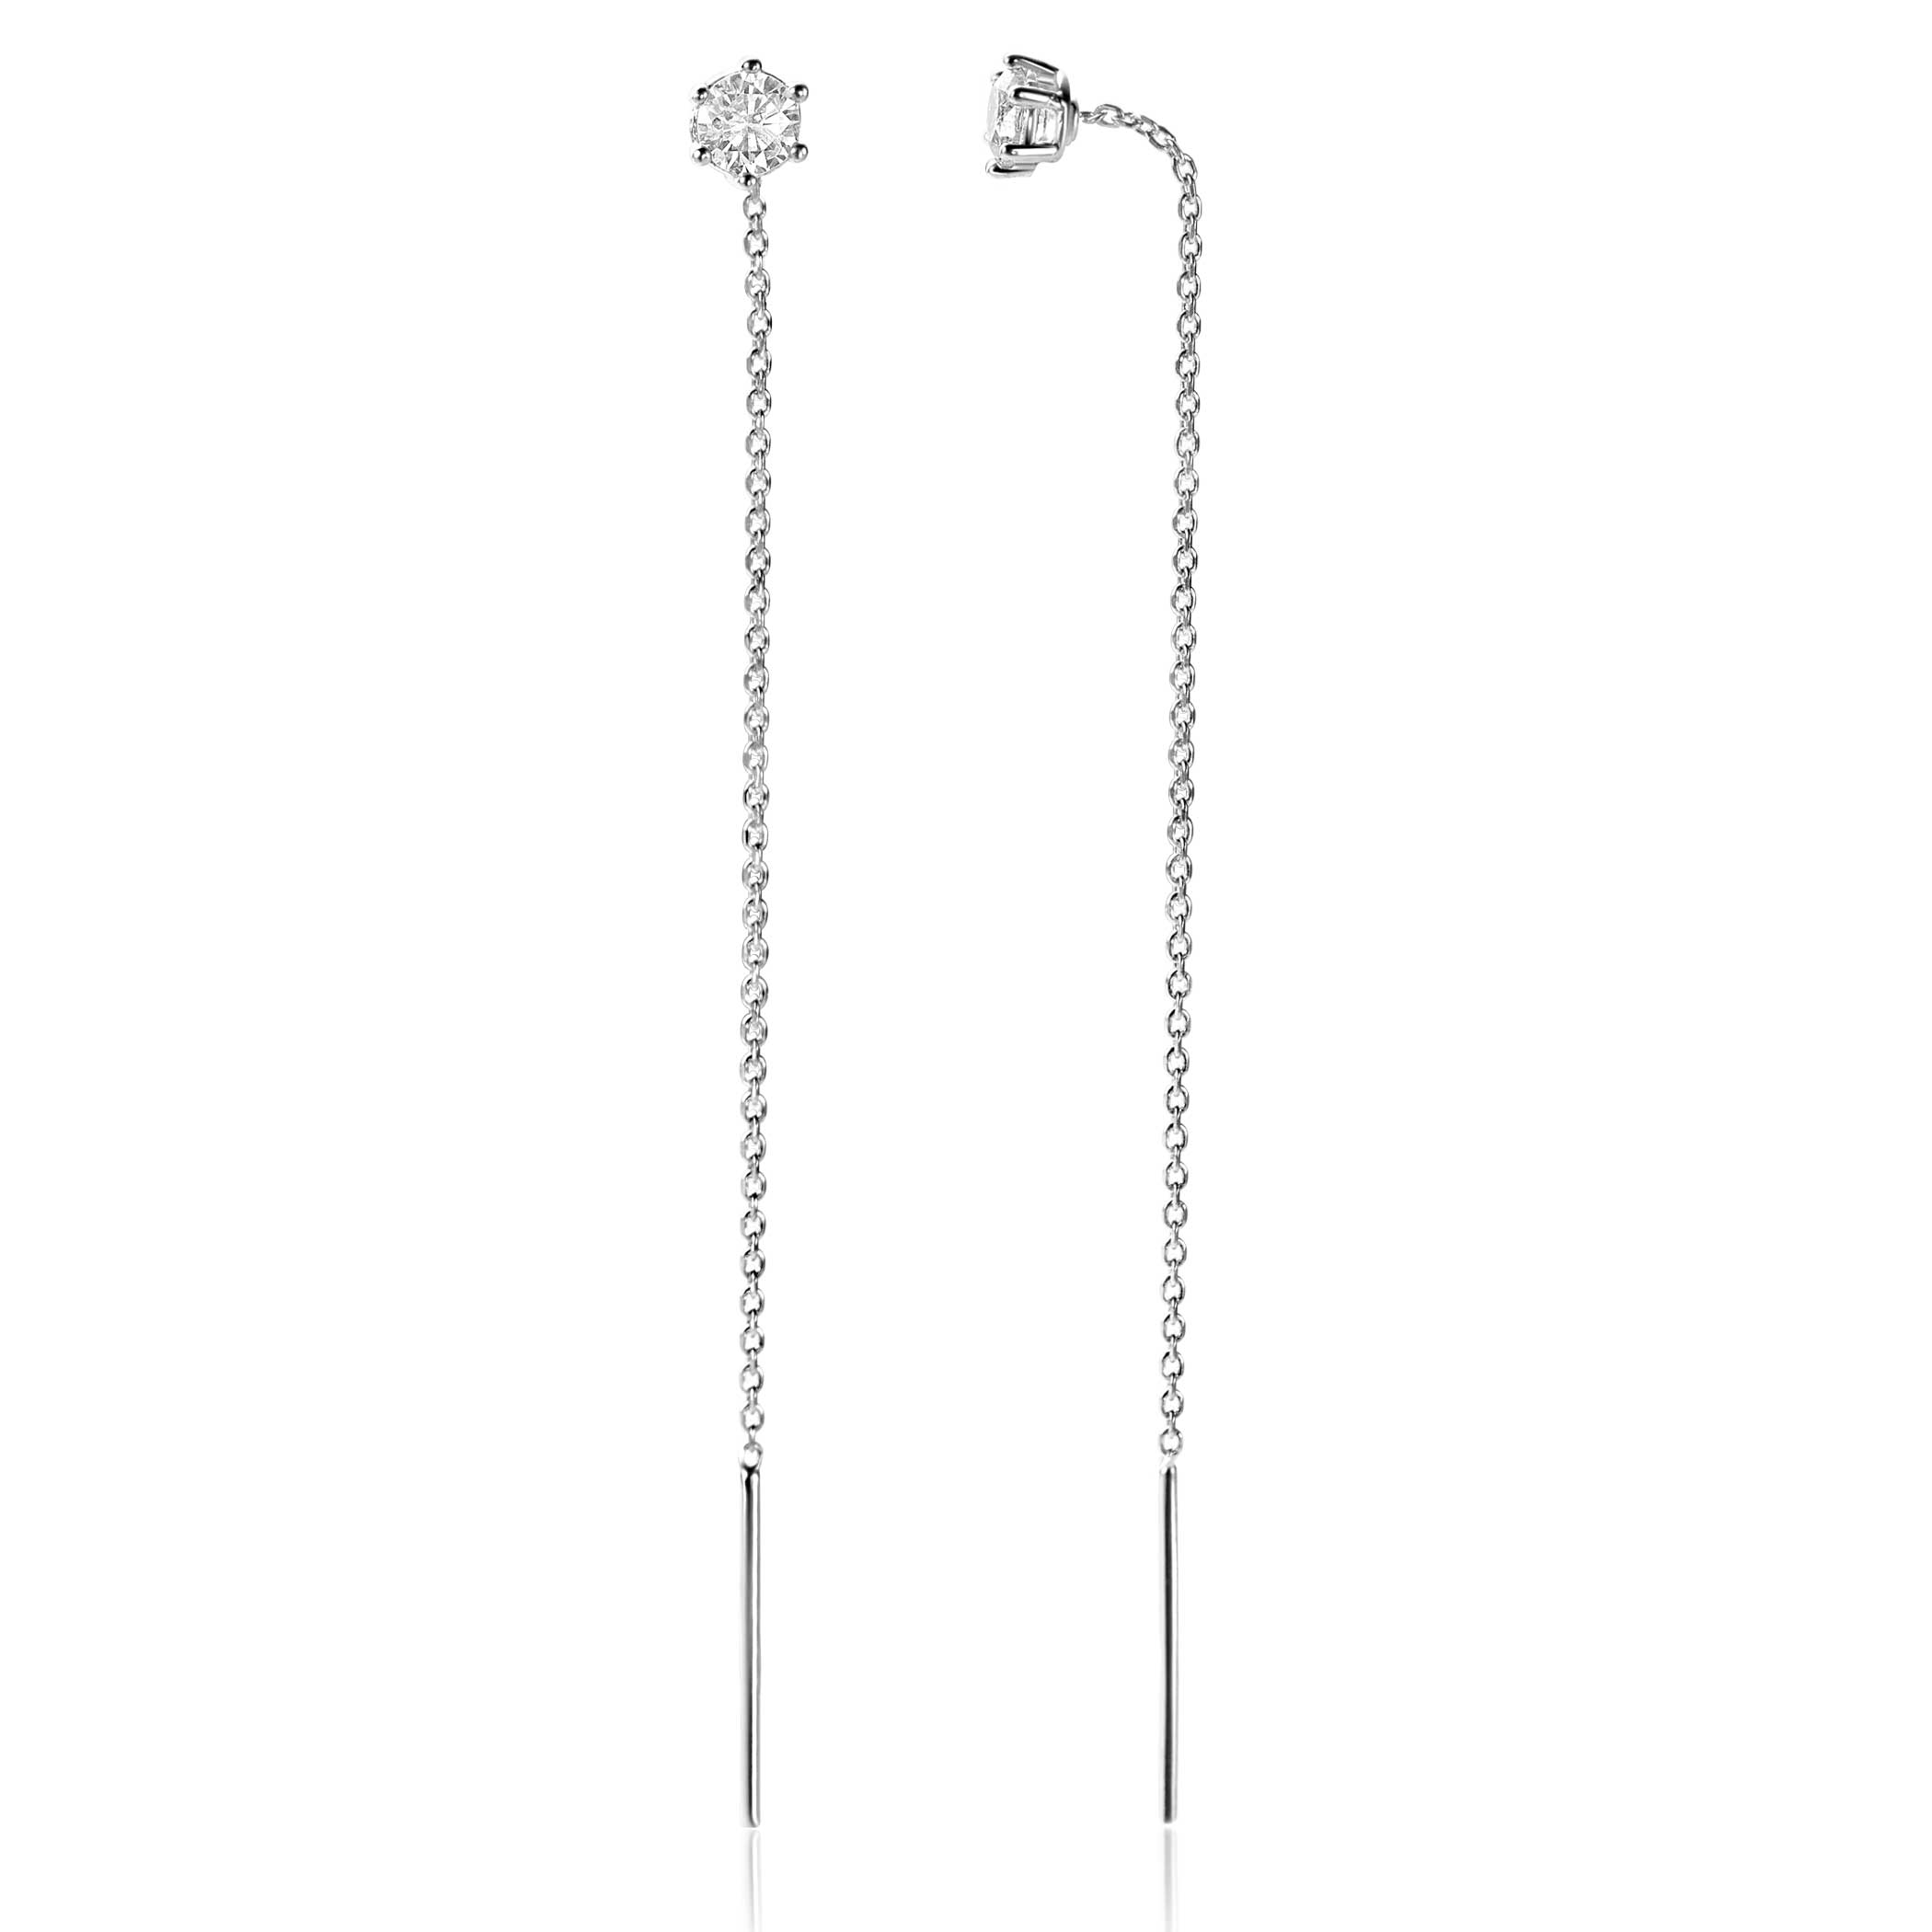 80mm ZINZI silver threader earrings with 5mm white zirconia chaton setting and graceful chain ZIO2576
